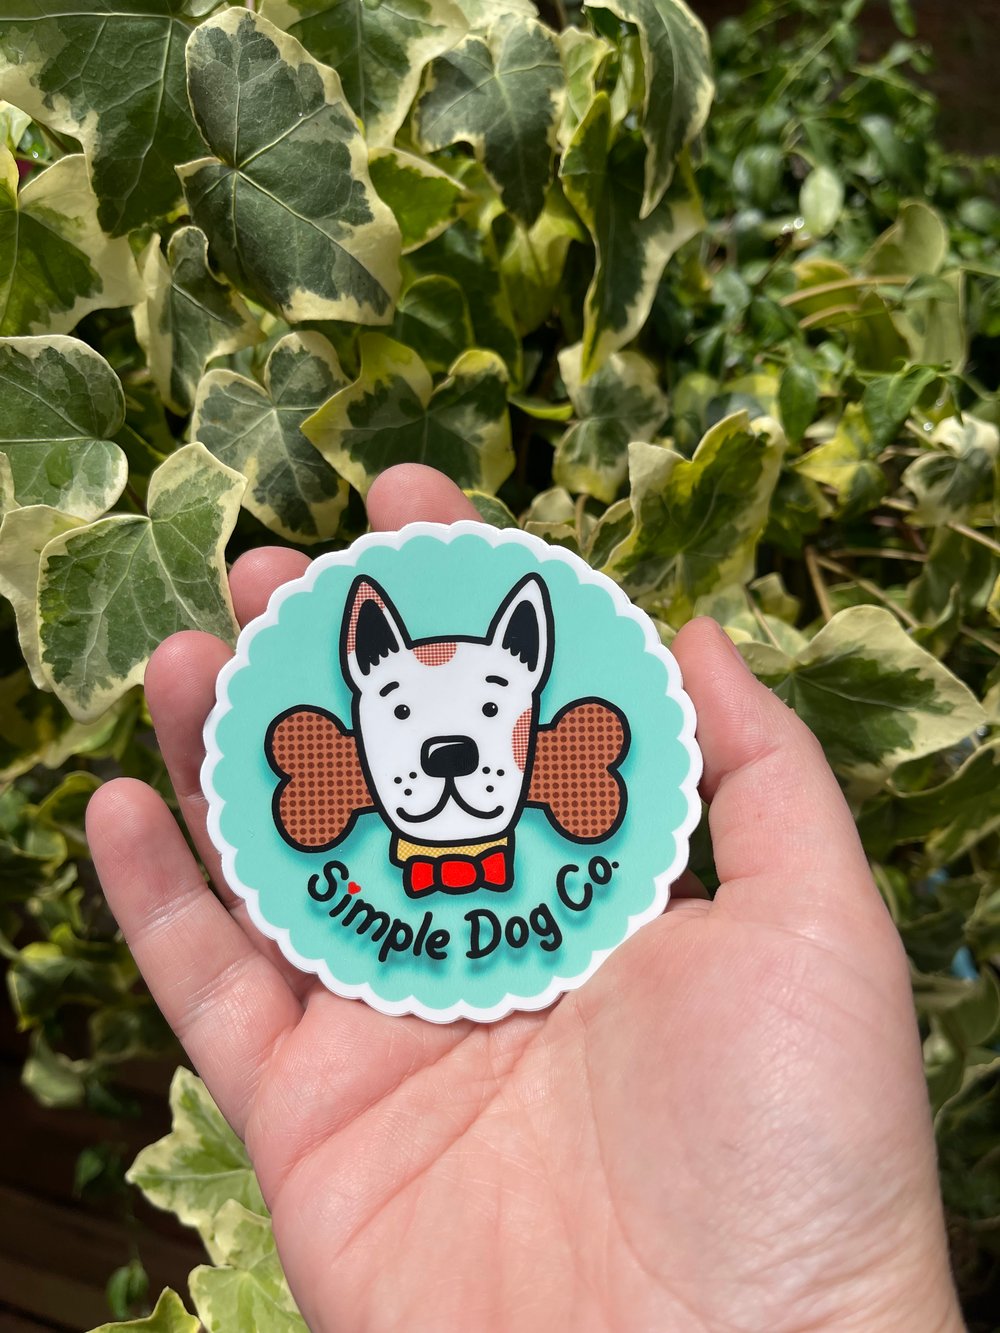 Image of Simple Dog Co Decal